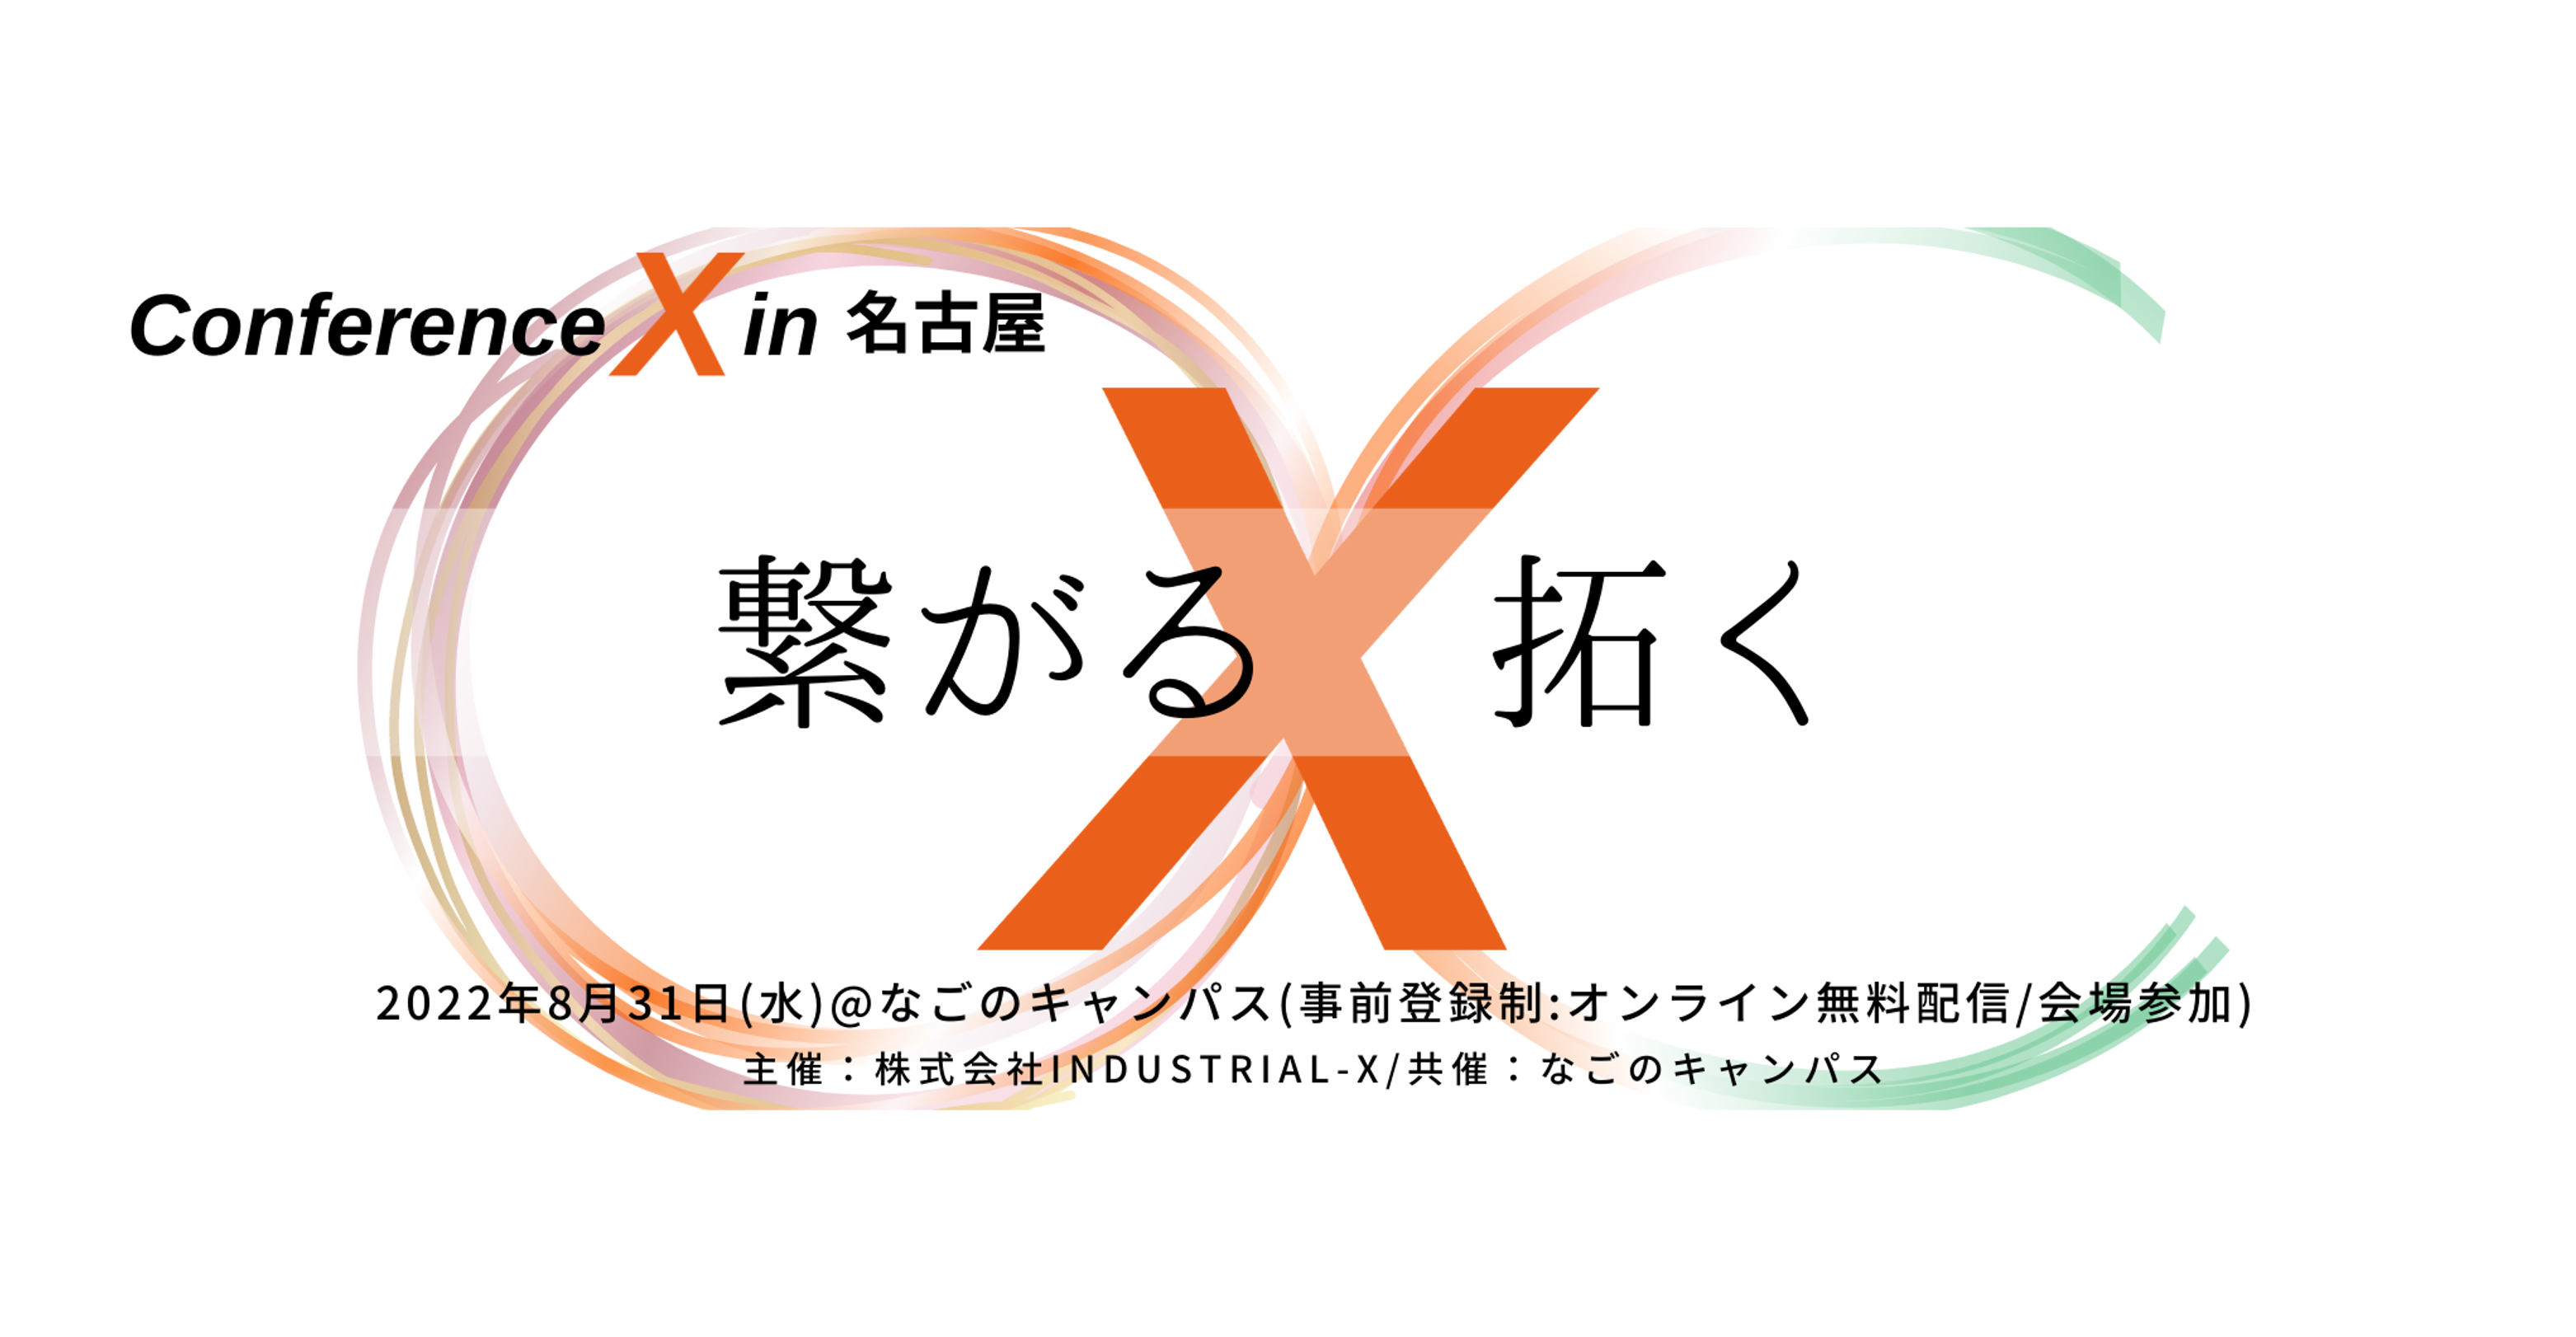 Conference X In 名古屋 22